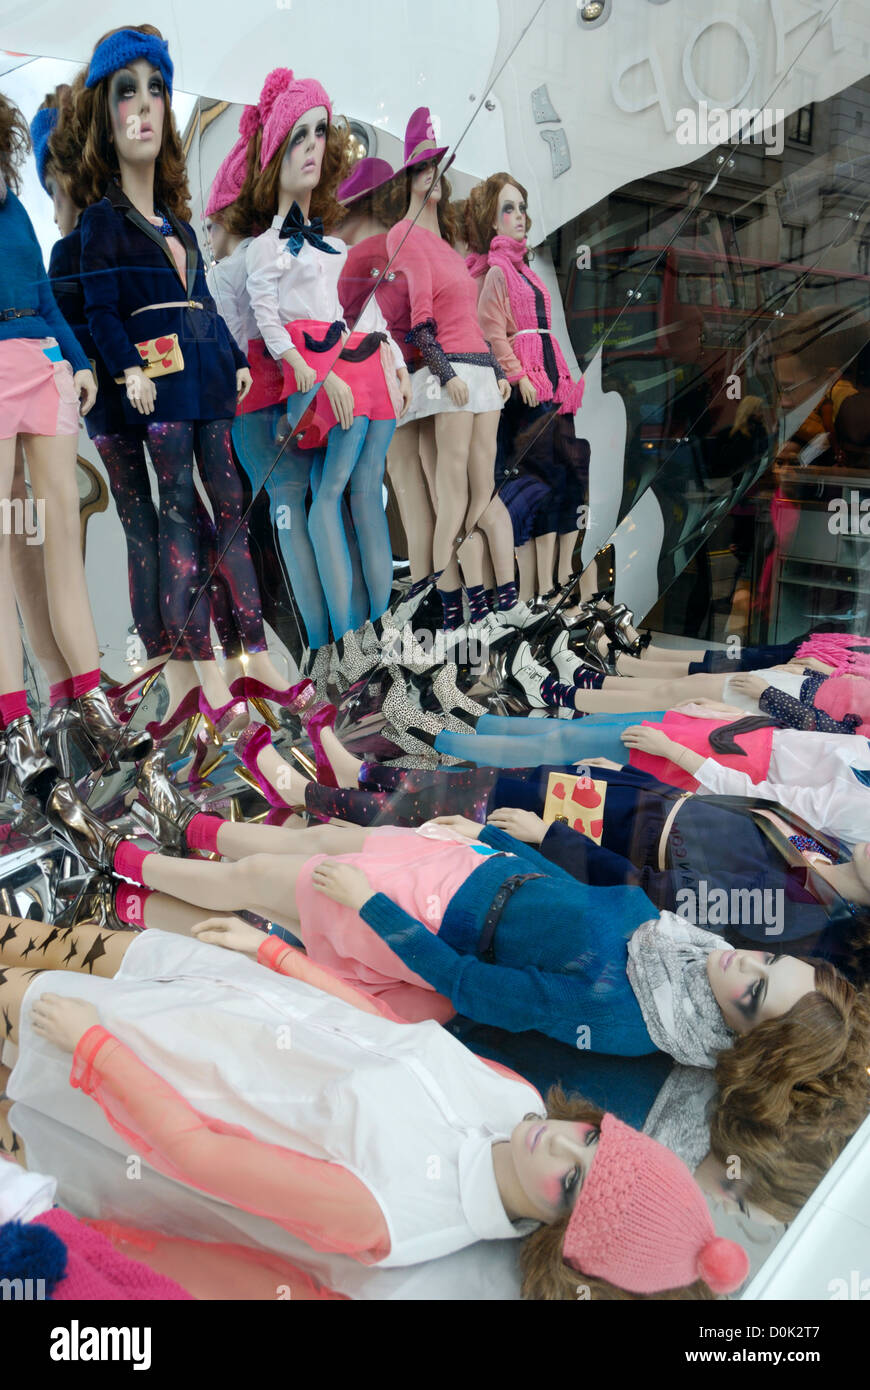 A fashion shop window display consisting of mannequins reflected in a mirror. Stock Photo